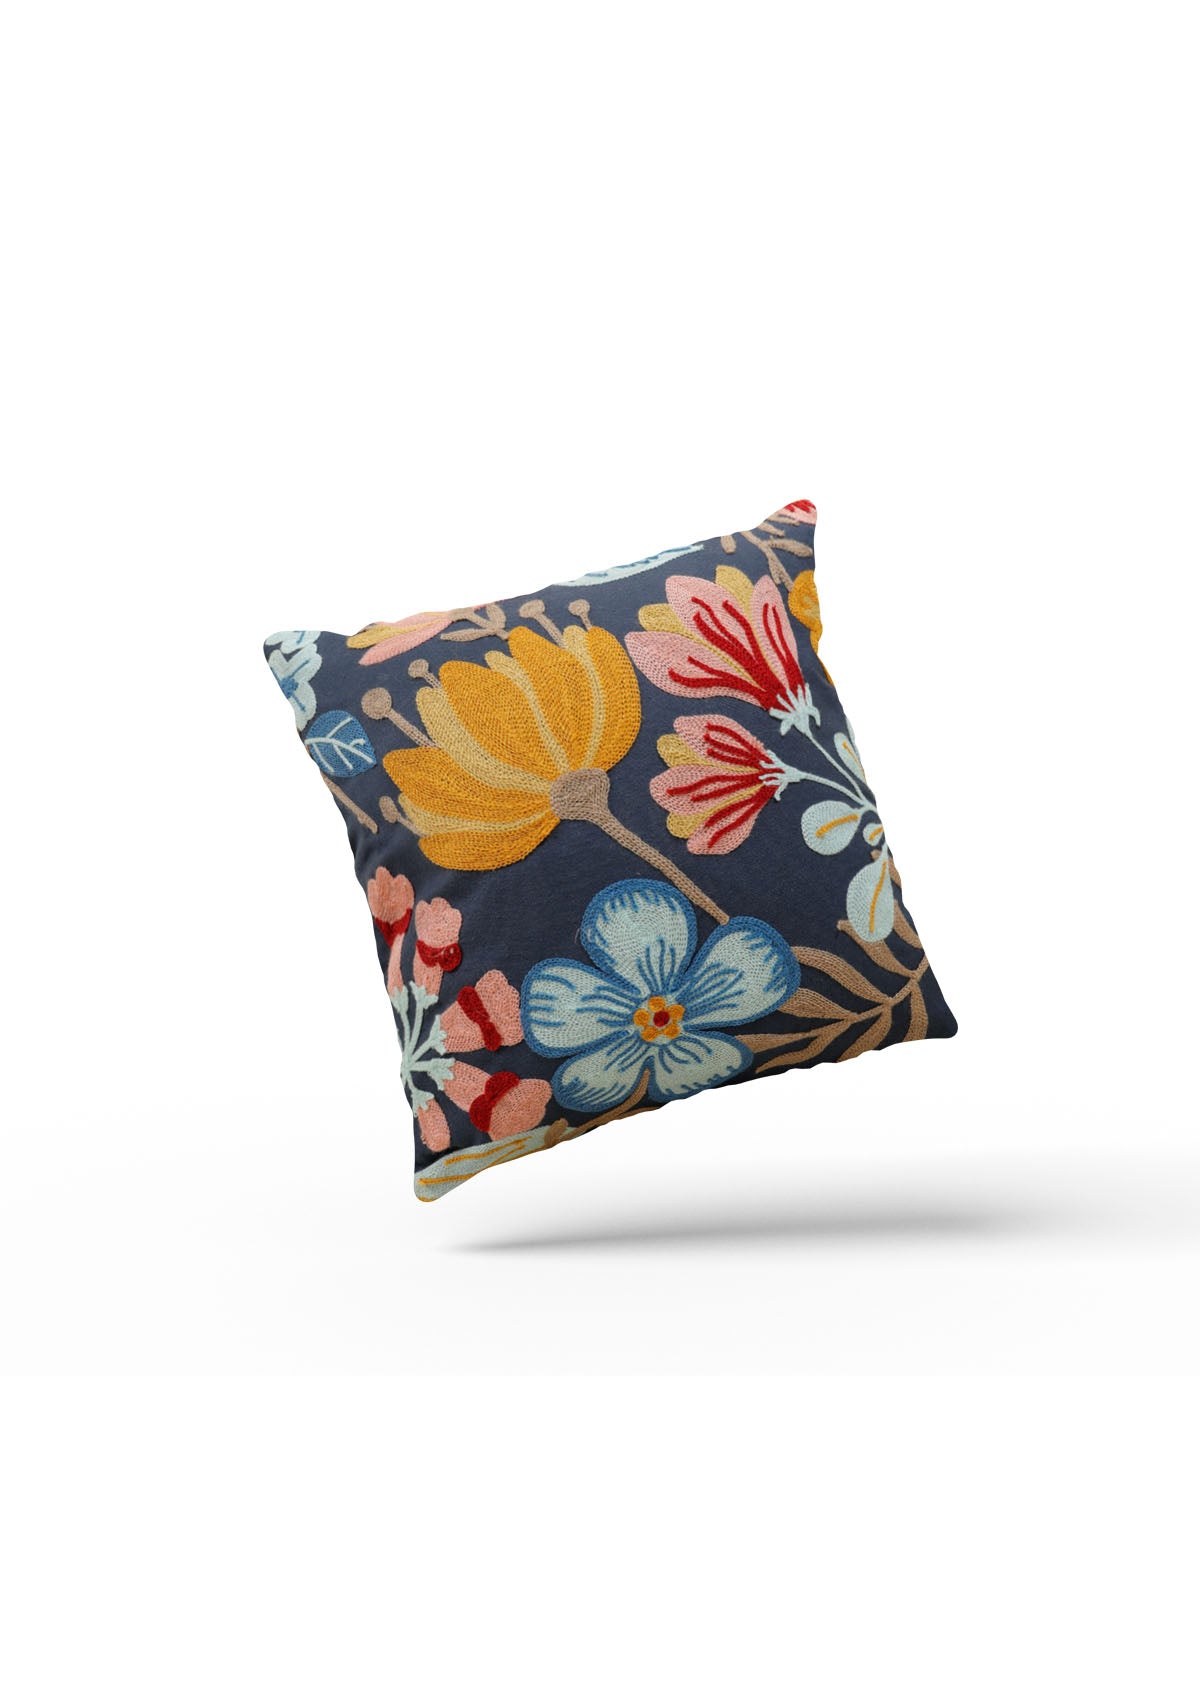 Vibrant blue floral patterned cushion cover for a refreshing and stylish home decor